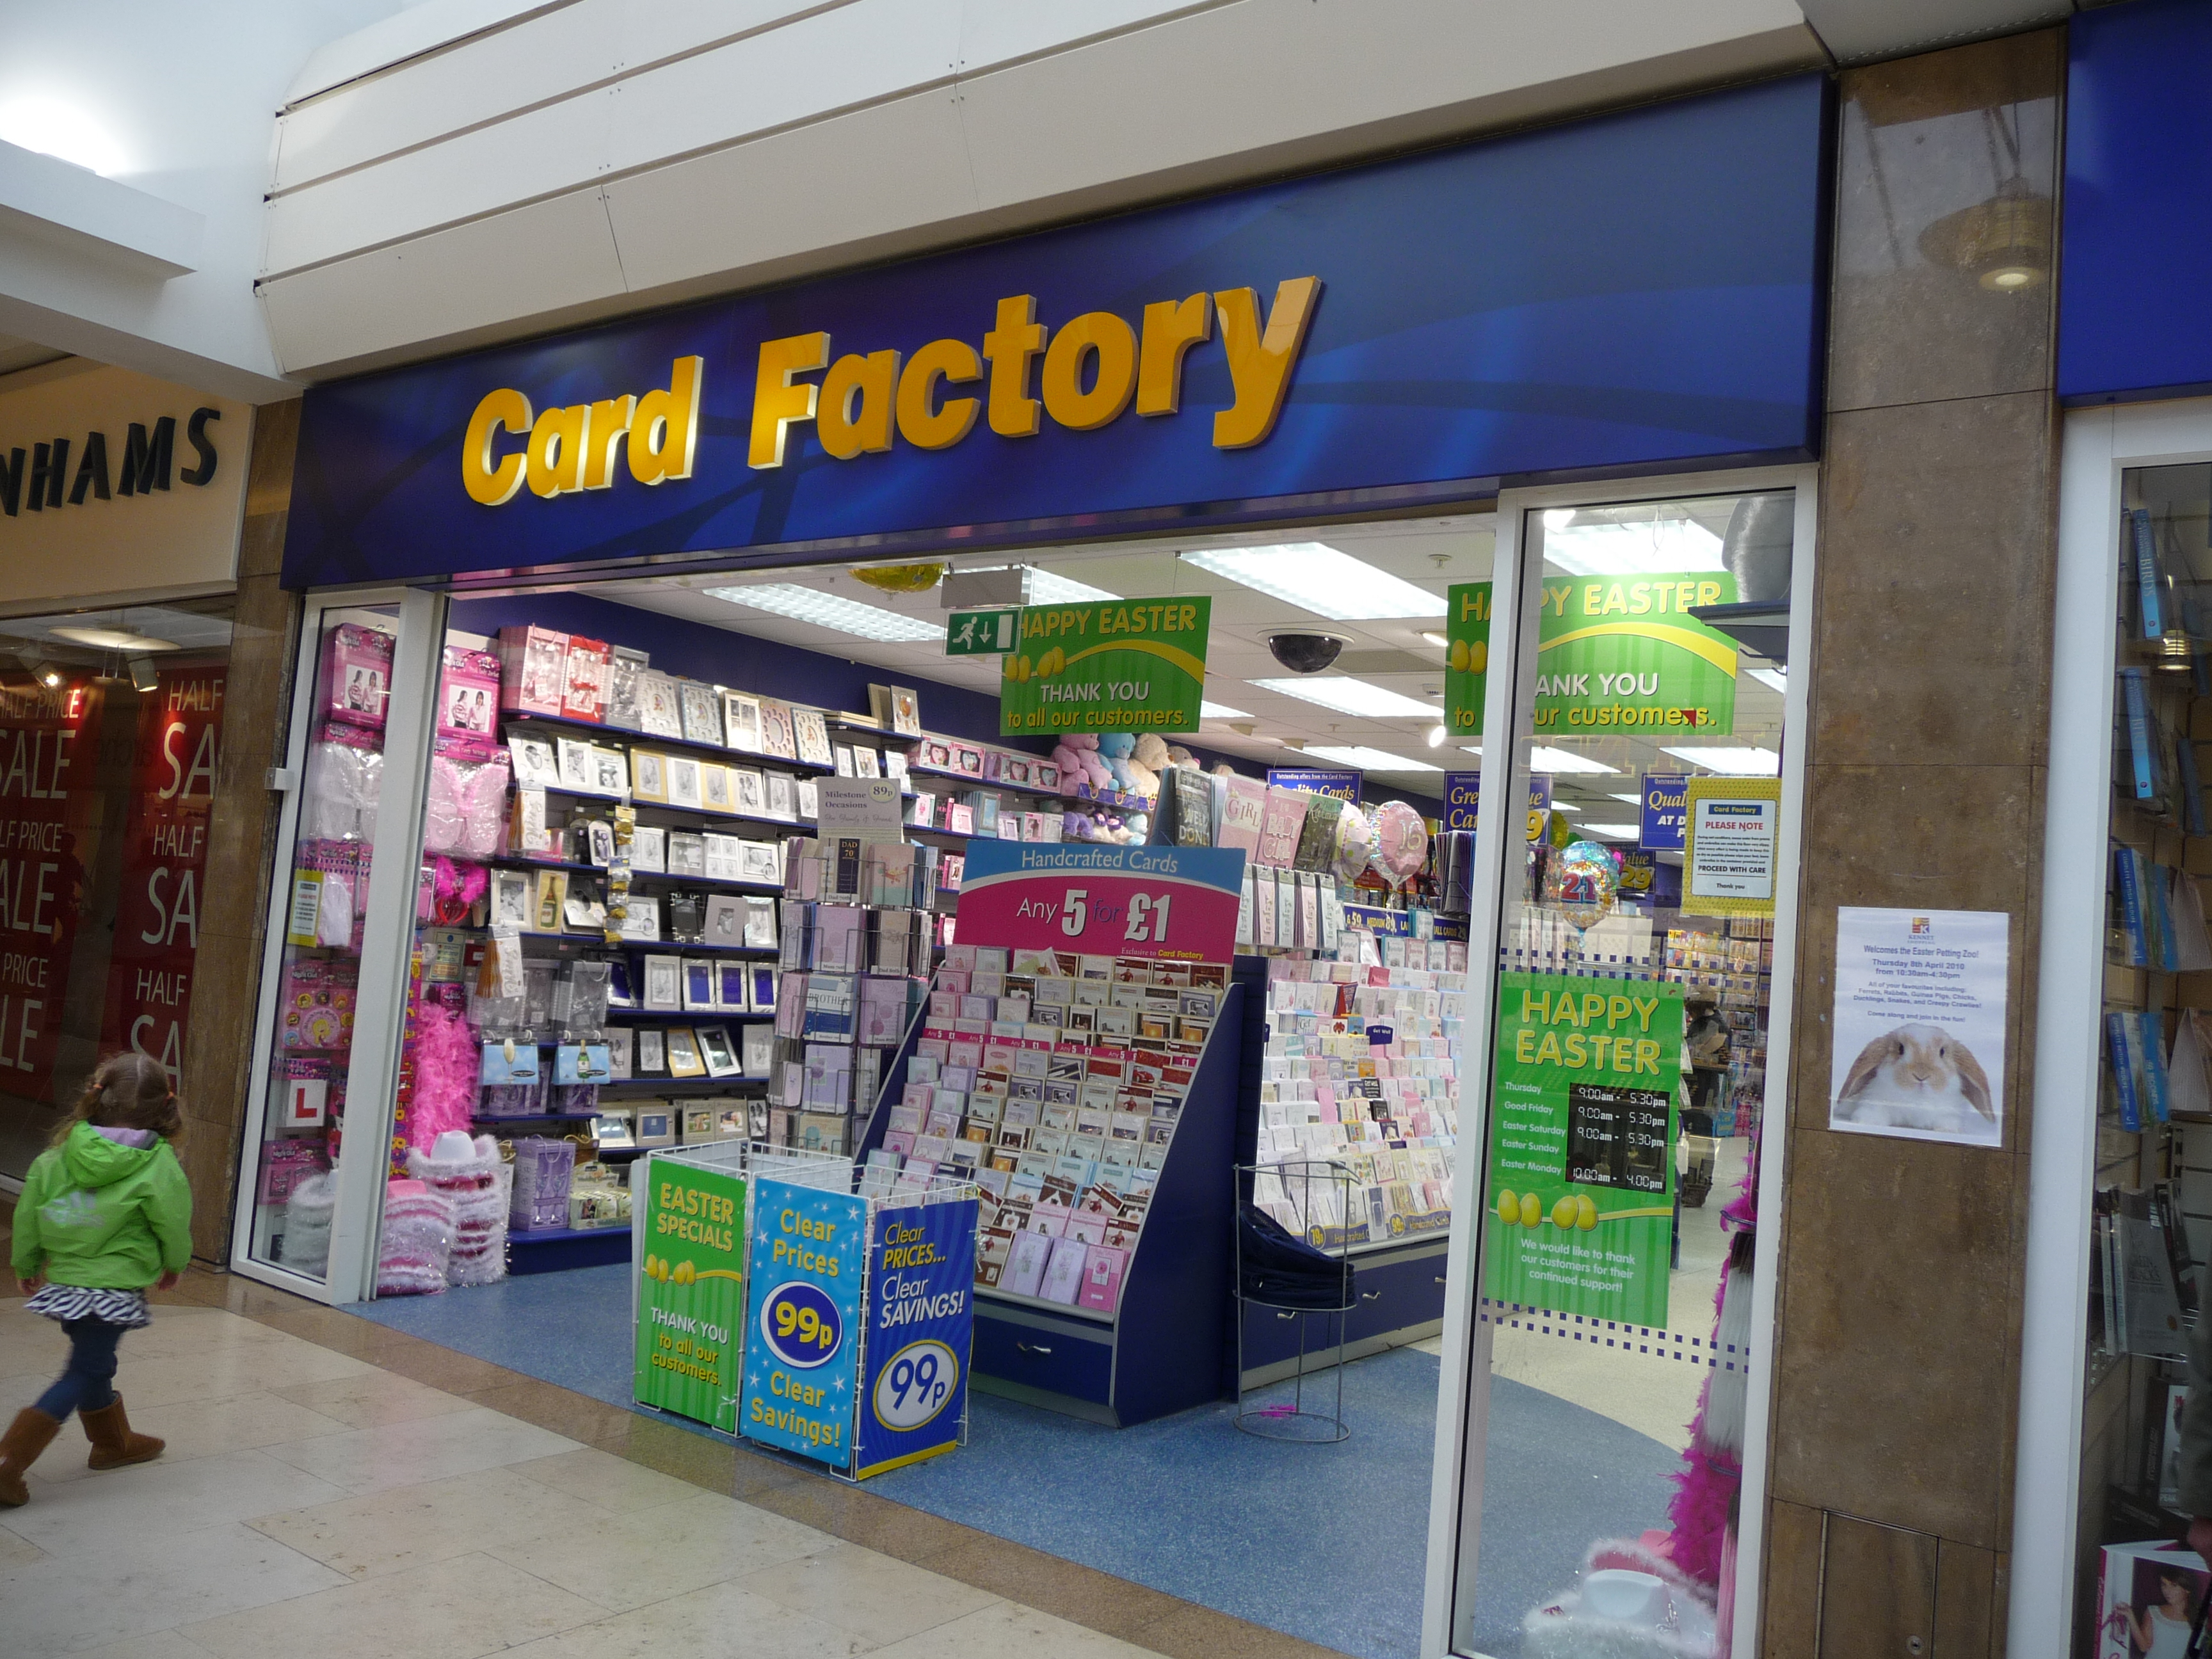 Above: Card Factory scored a high 75% on the customer satisfaction stakes by the British public. 